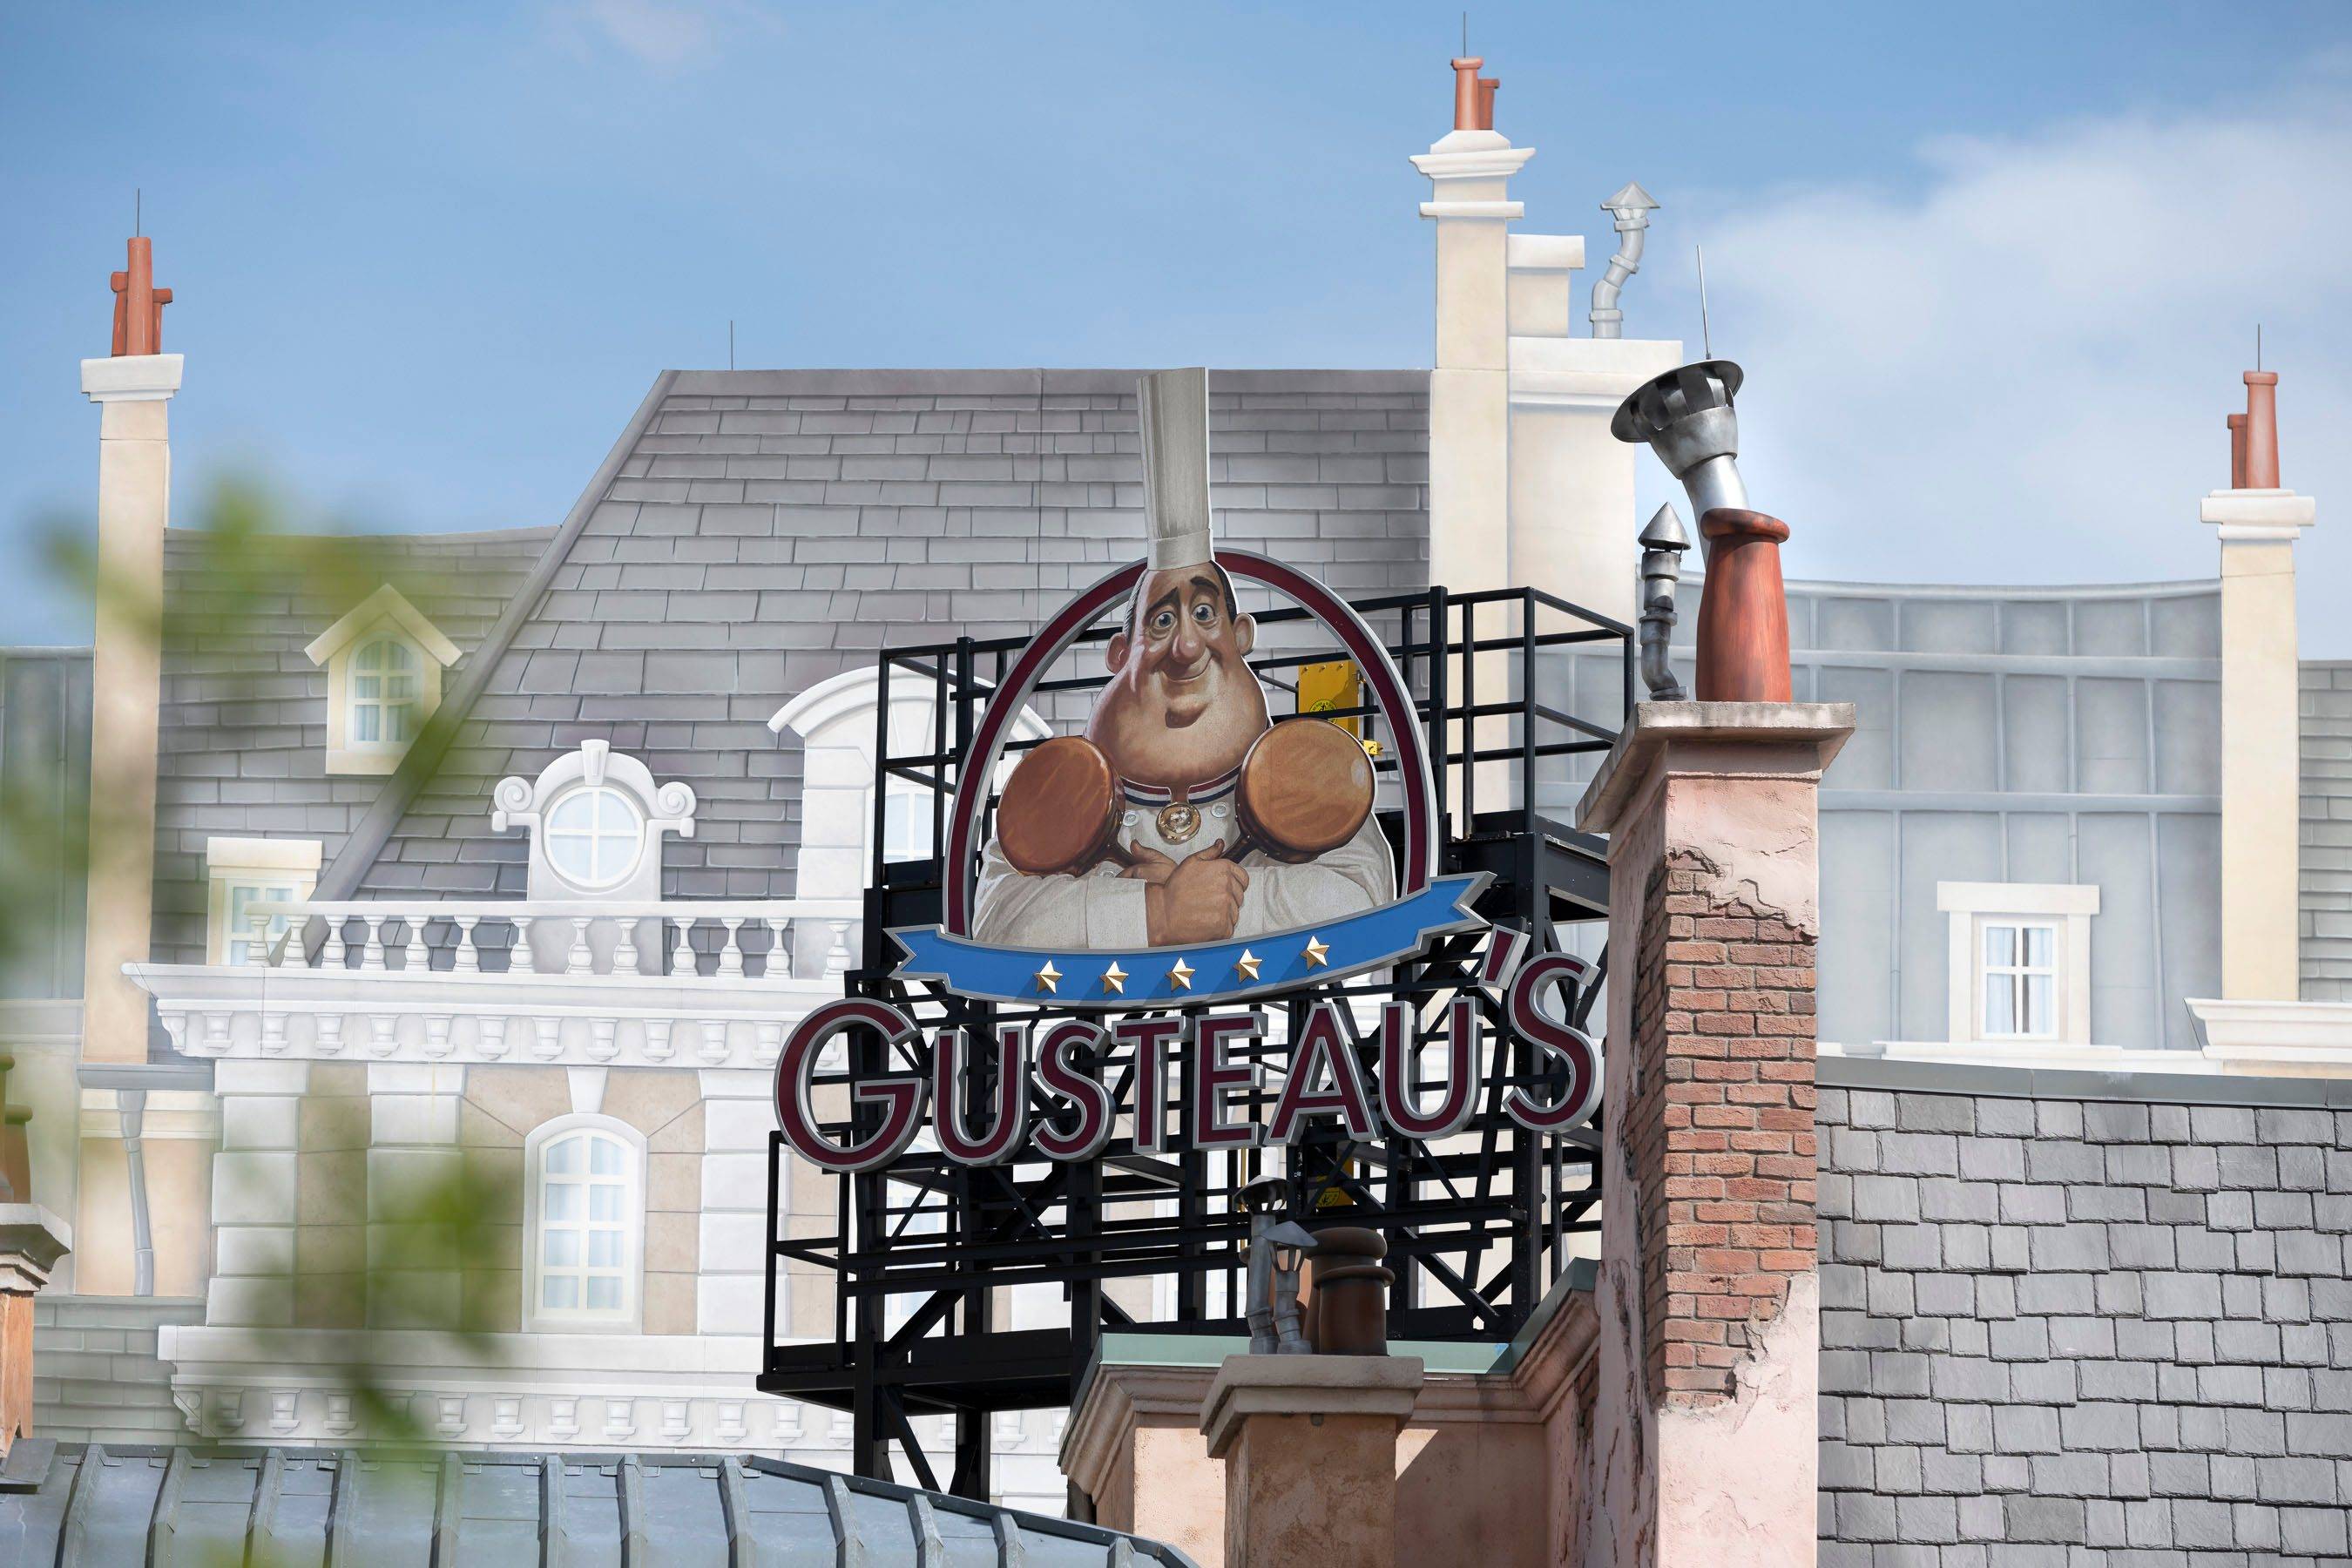 Remy's Ratatouille Adventure is the name of the new ride coming to Epcot's France Pavilion